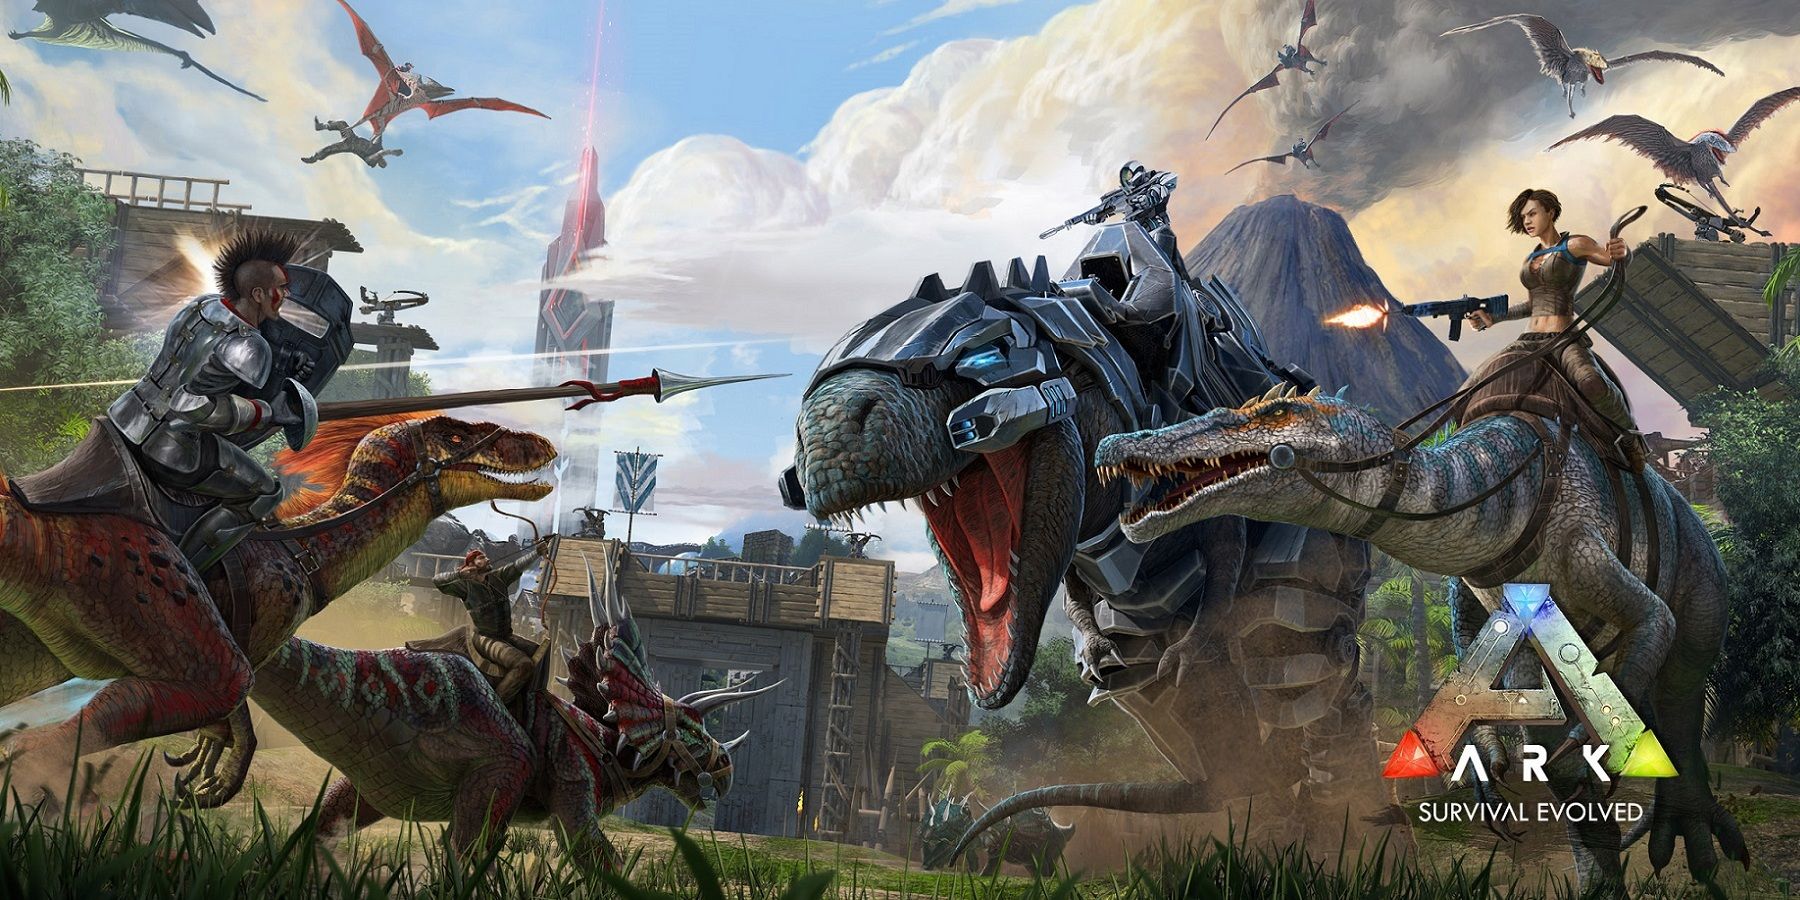 Ark: Survival Evolved servers being shut down, and fans are livid